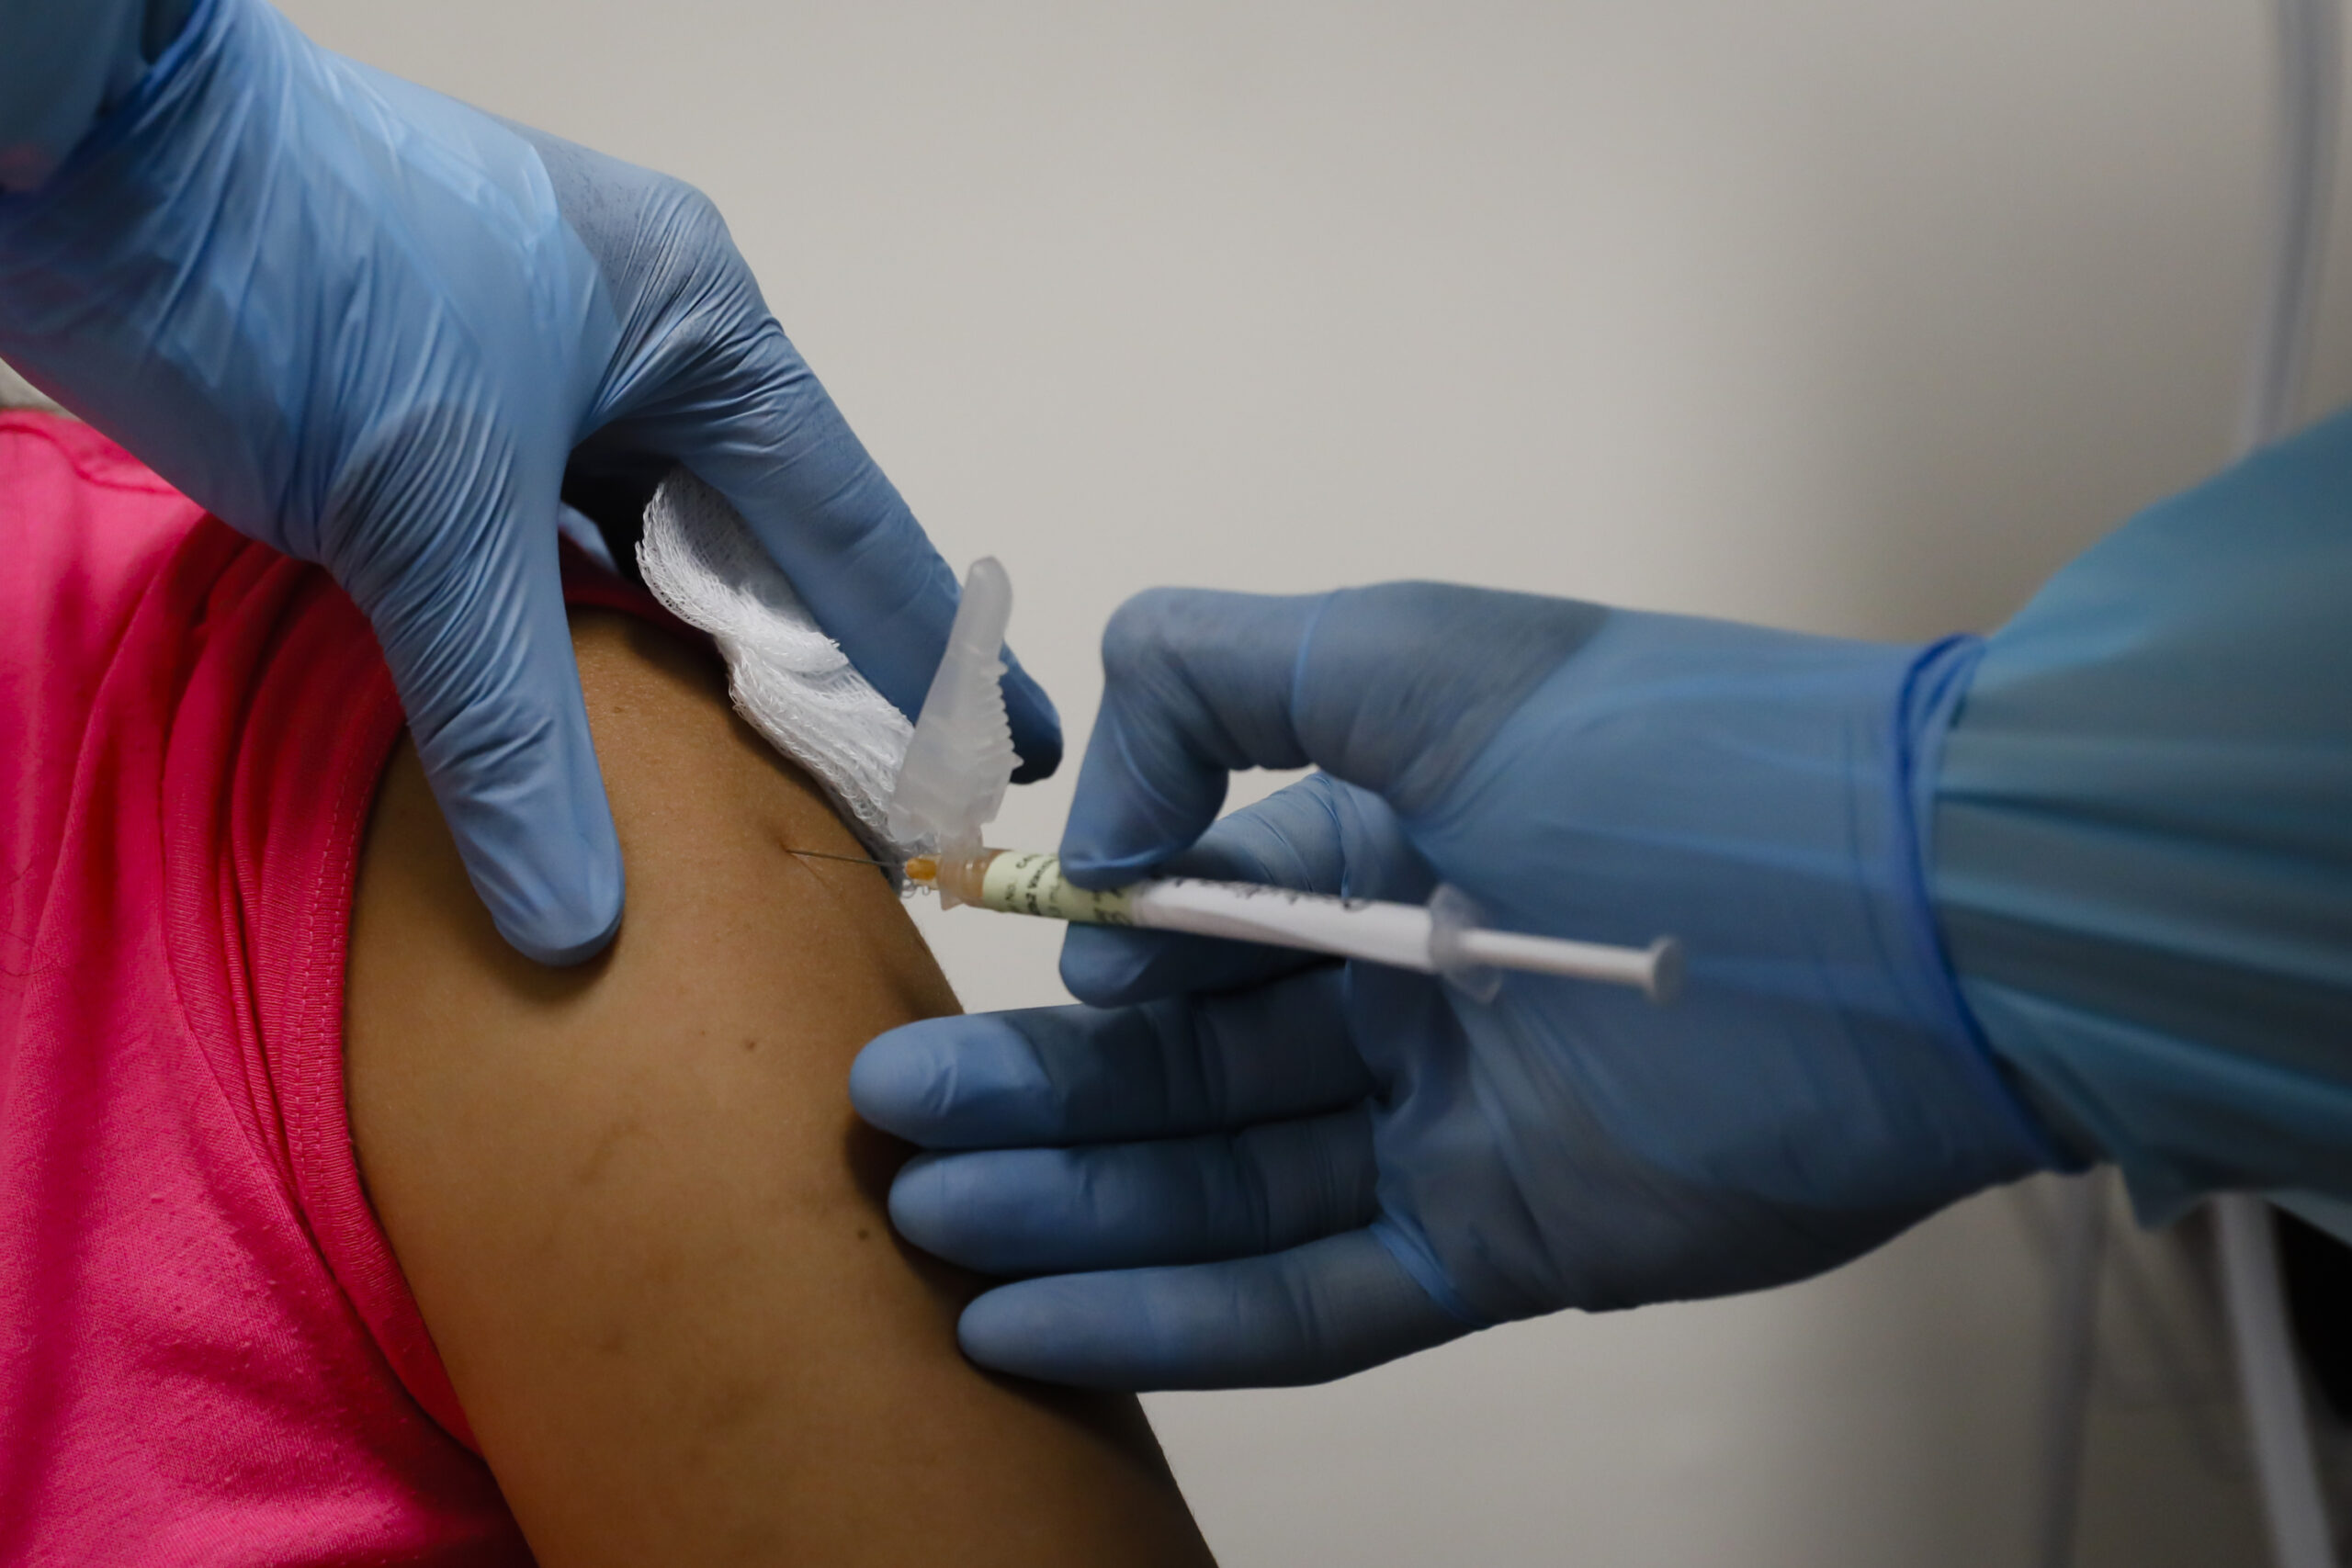 G7: Pledge to share one billion vaccine doses with poorer countries is a drop in the ocean